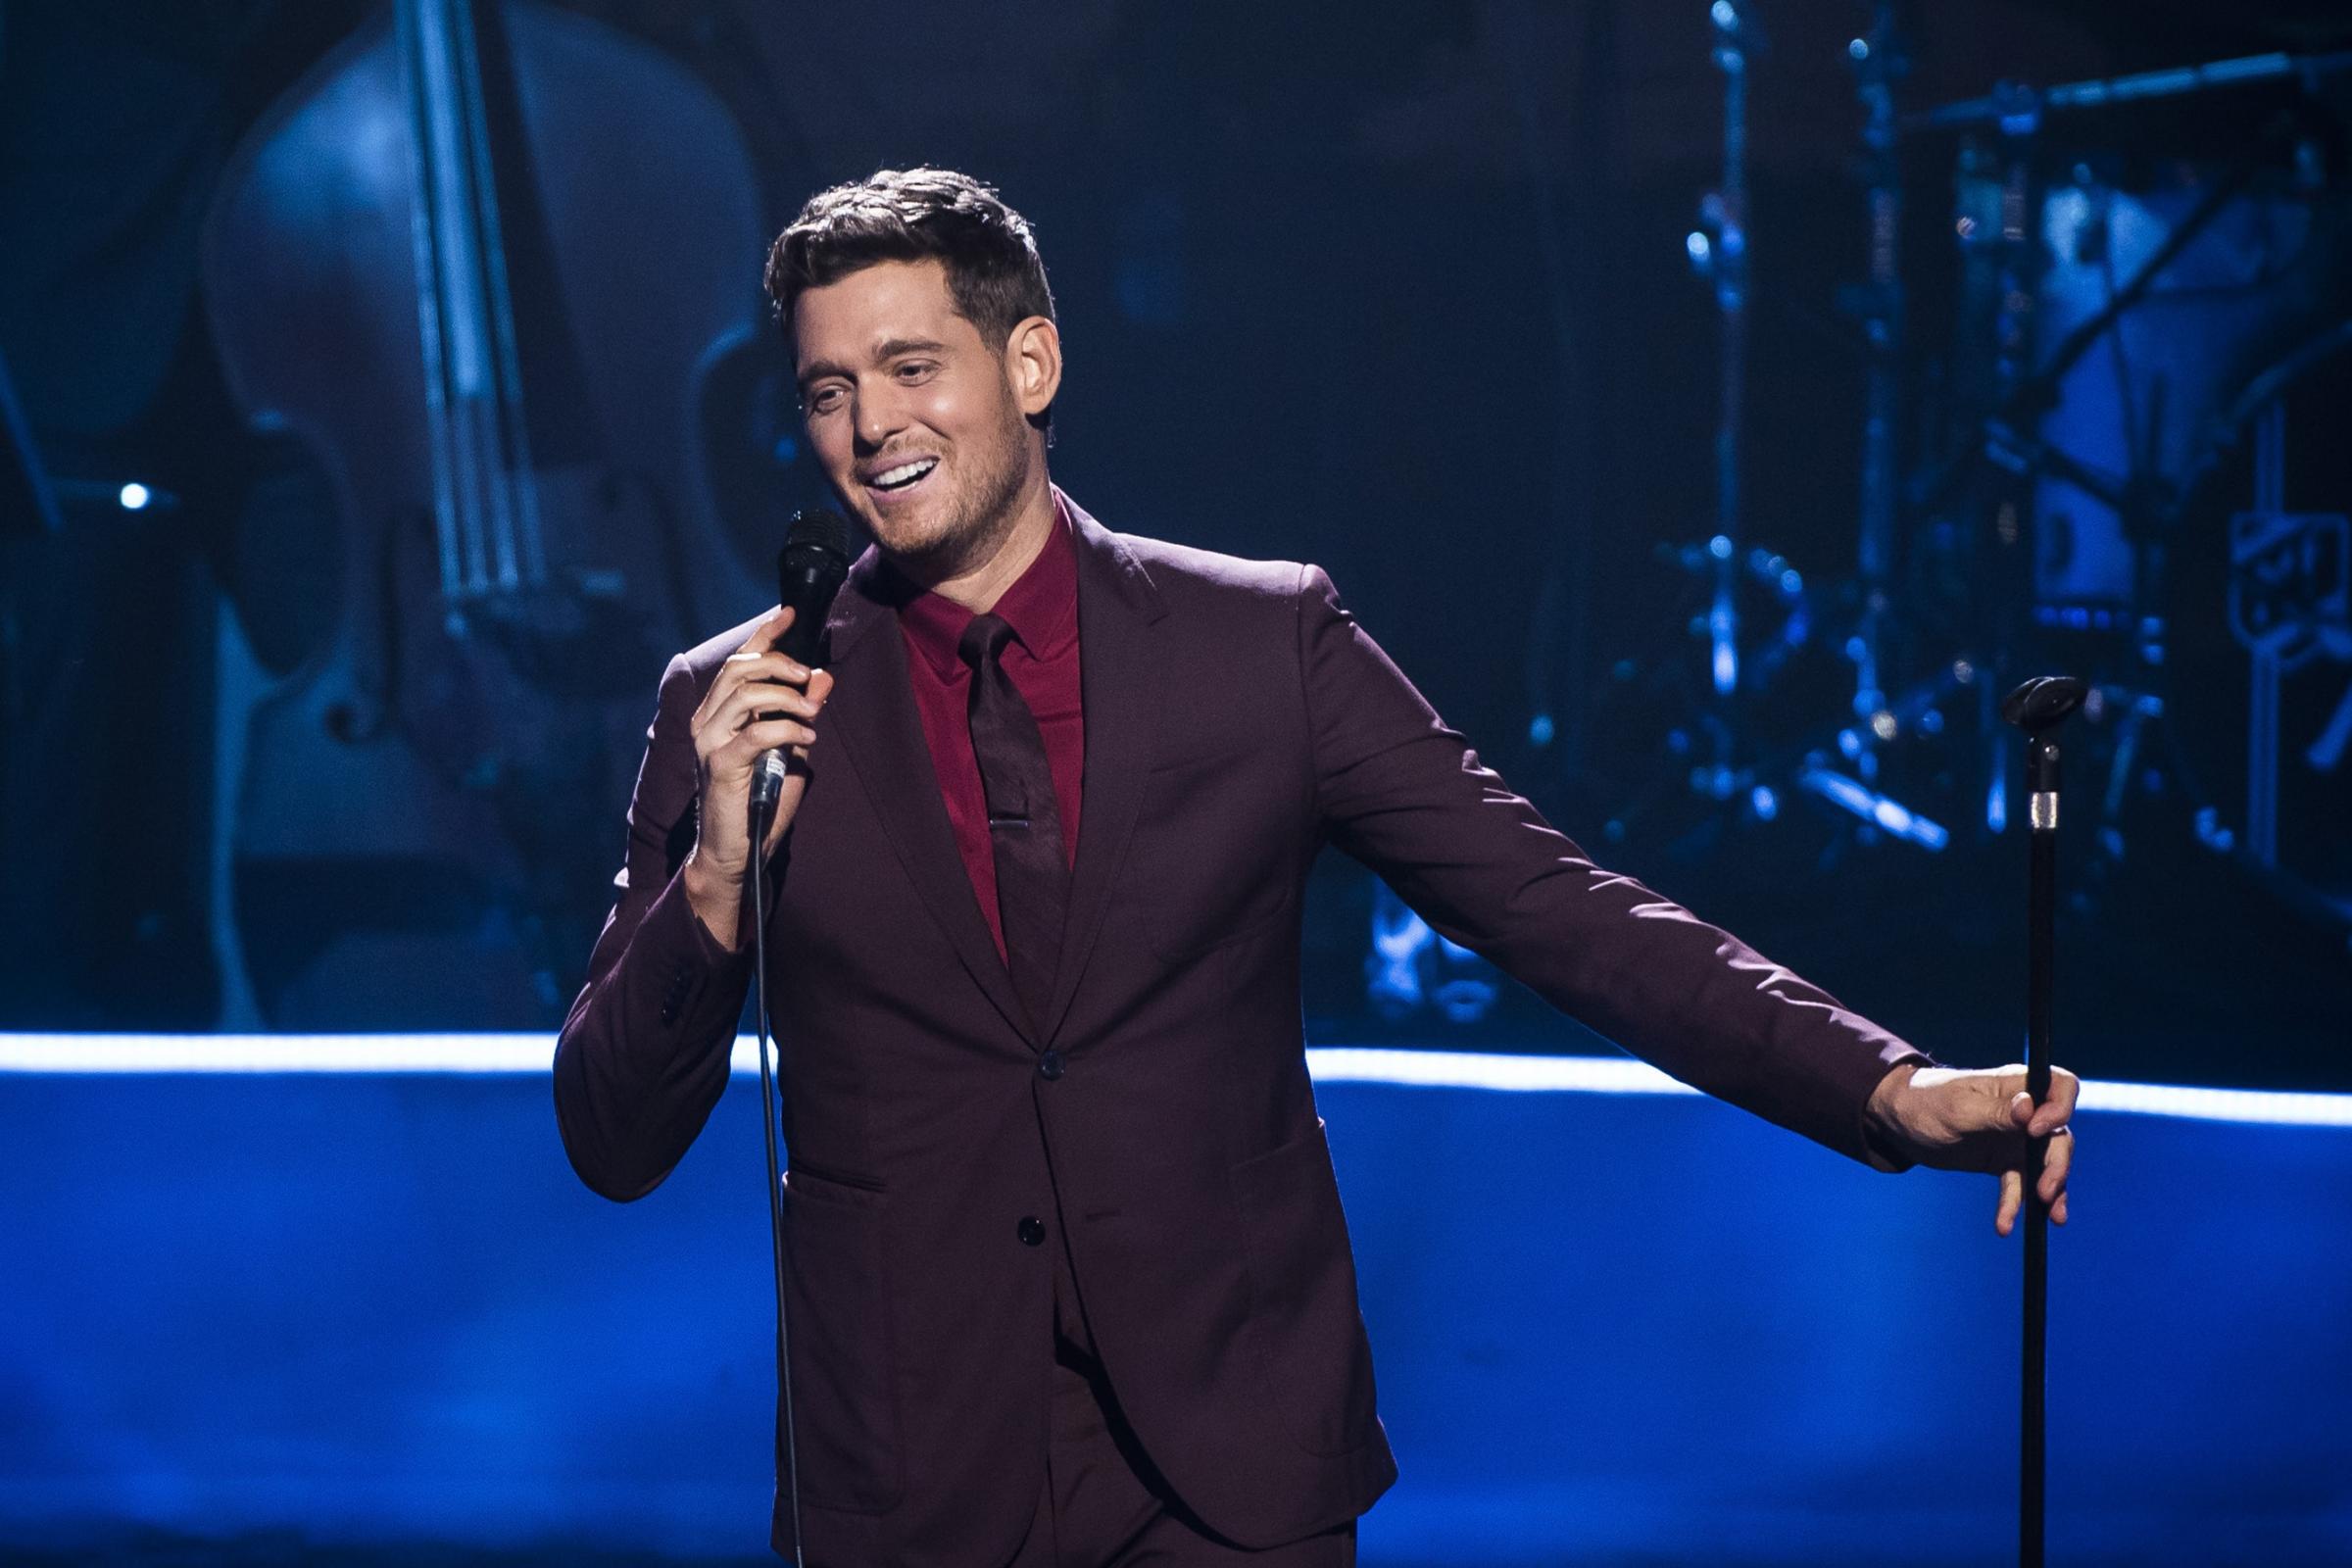 Moon And Me creator: How I signed up Michael Buble to sing a ‘silly song’